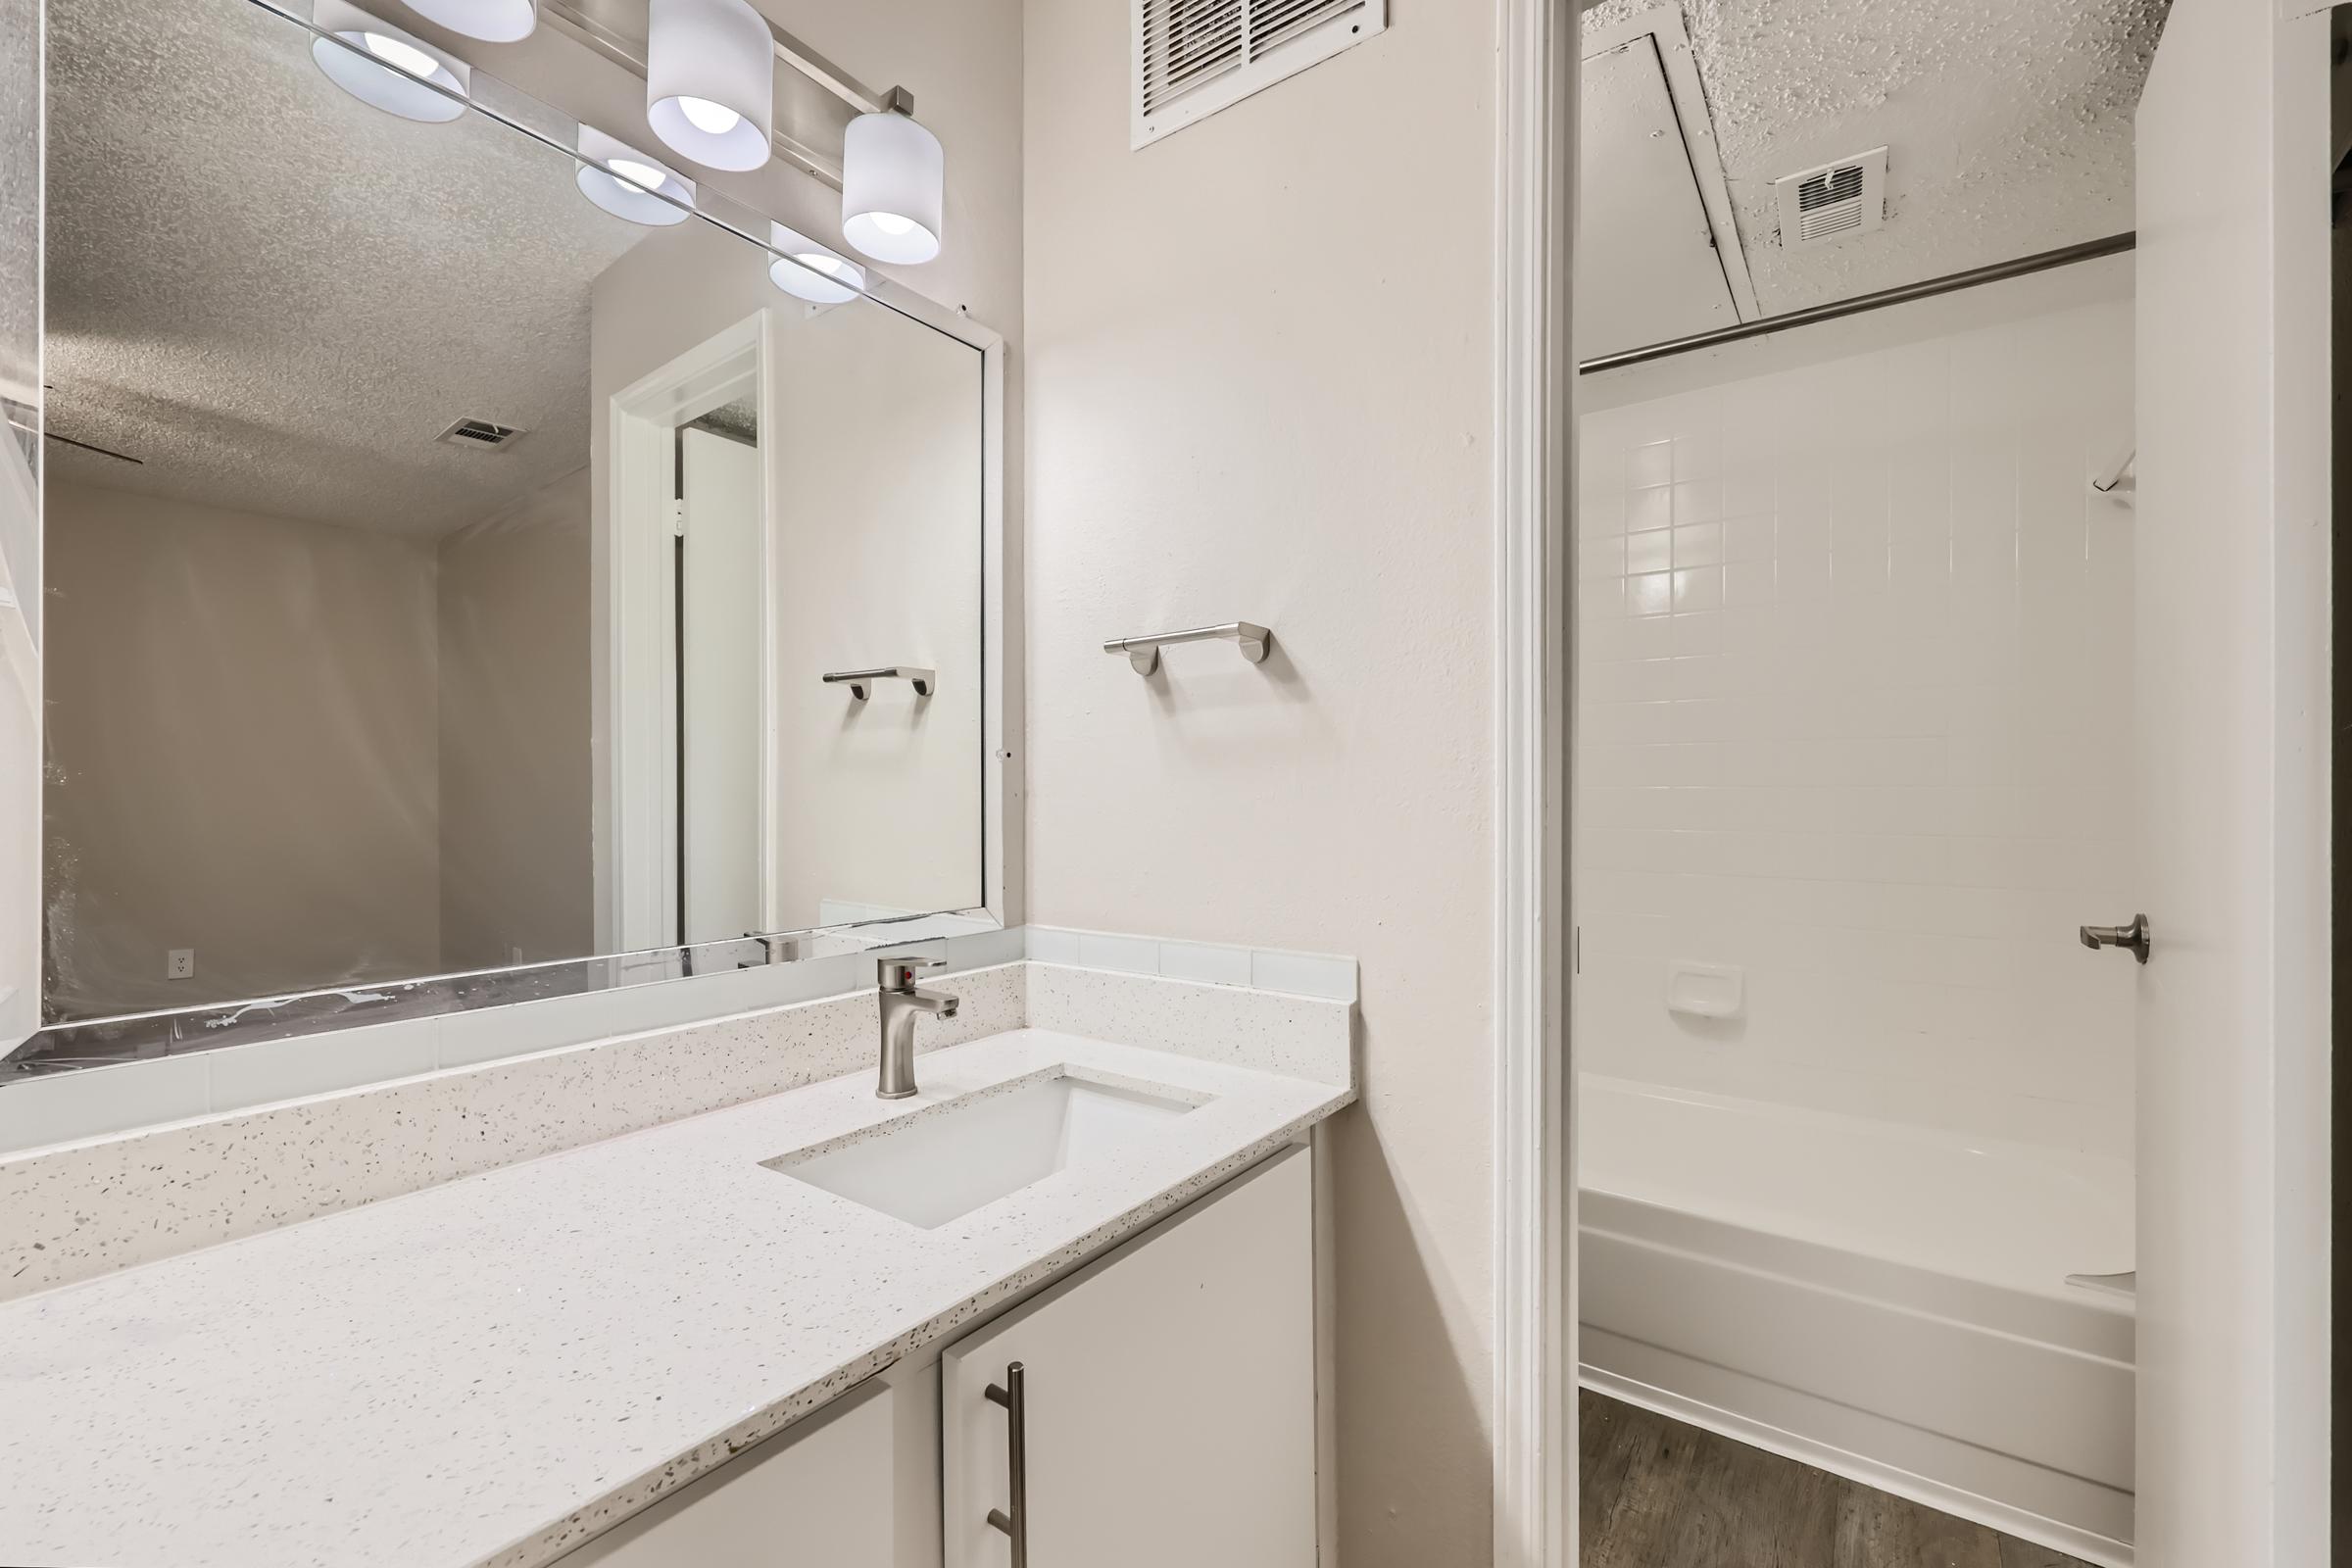 A bathroom with a separated shower and a vanity with quartz countertops at Rise Oak Creek.